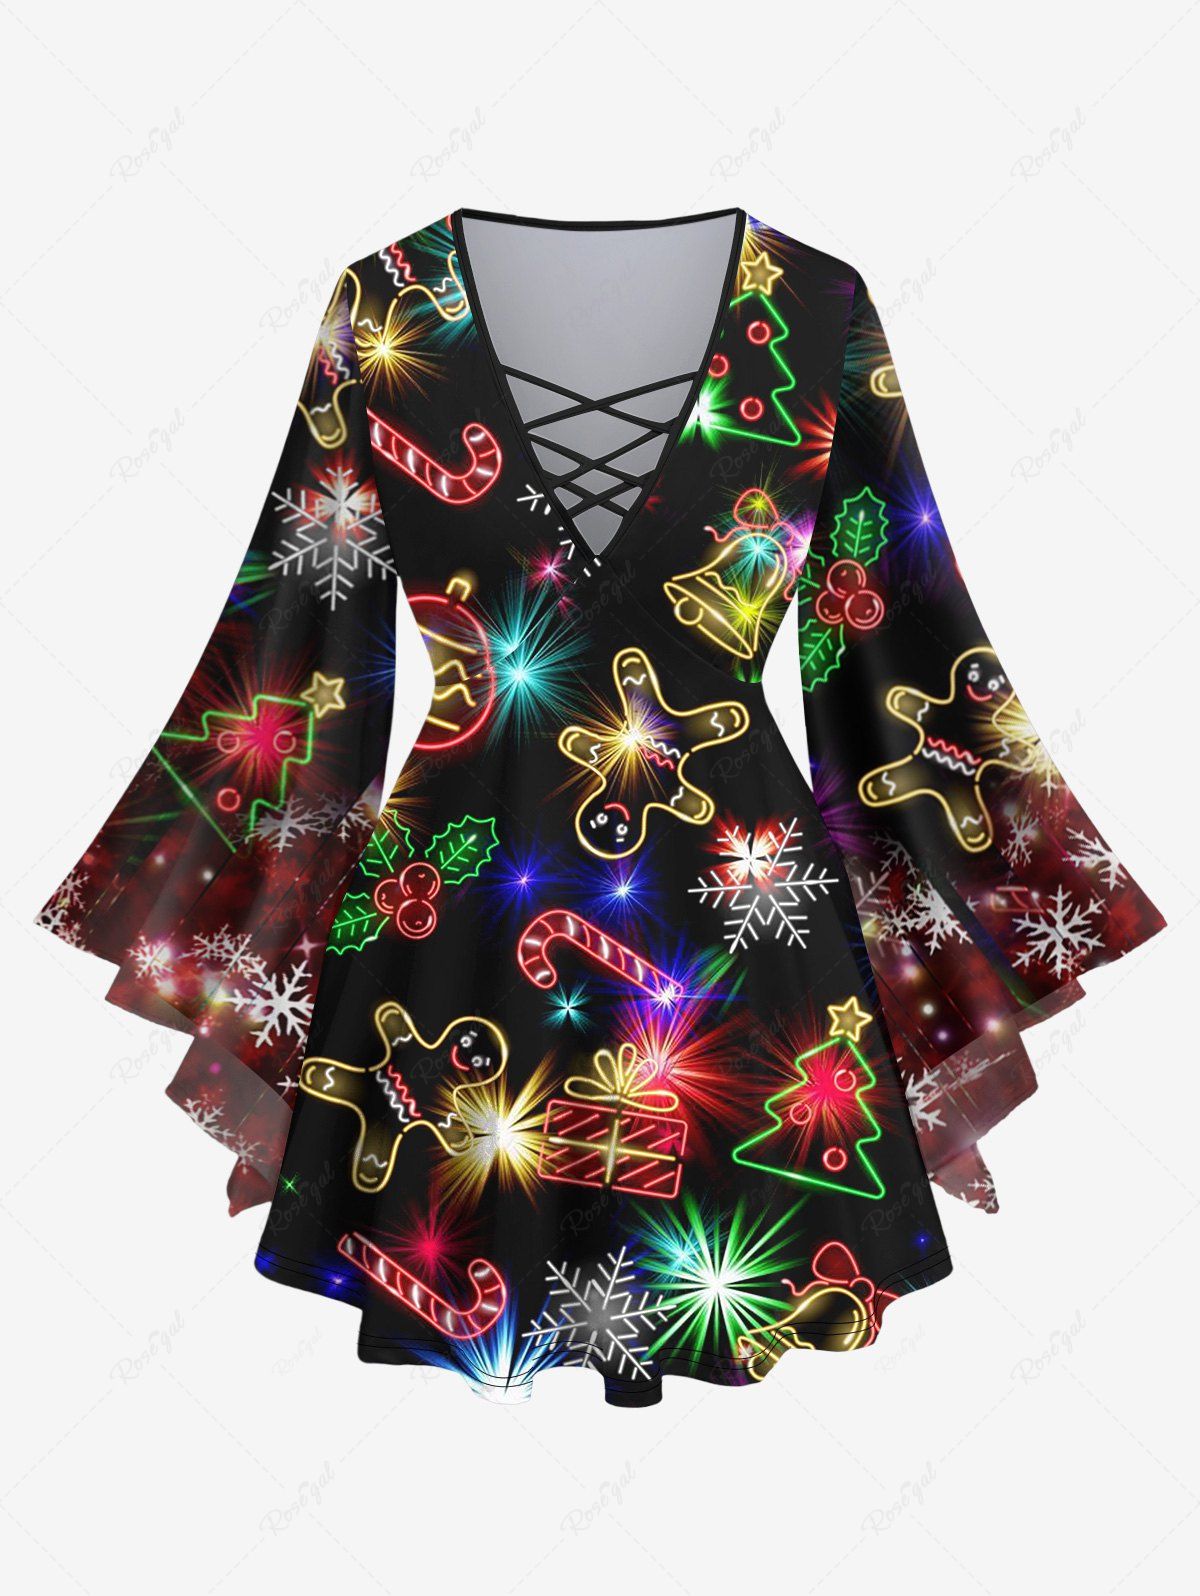 Store Plus Size Glitter Sparkling Christmas Tree Light Ball Bell Snowflake Candy Gingerbread Print Flare Sleeves Lattice Ombre Top  